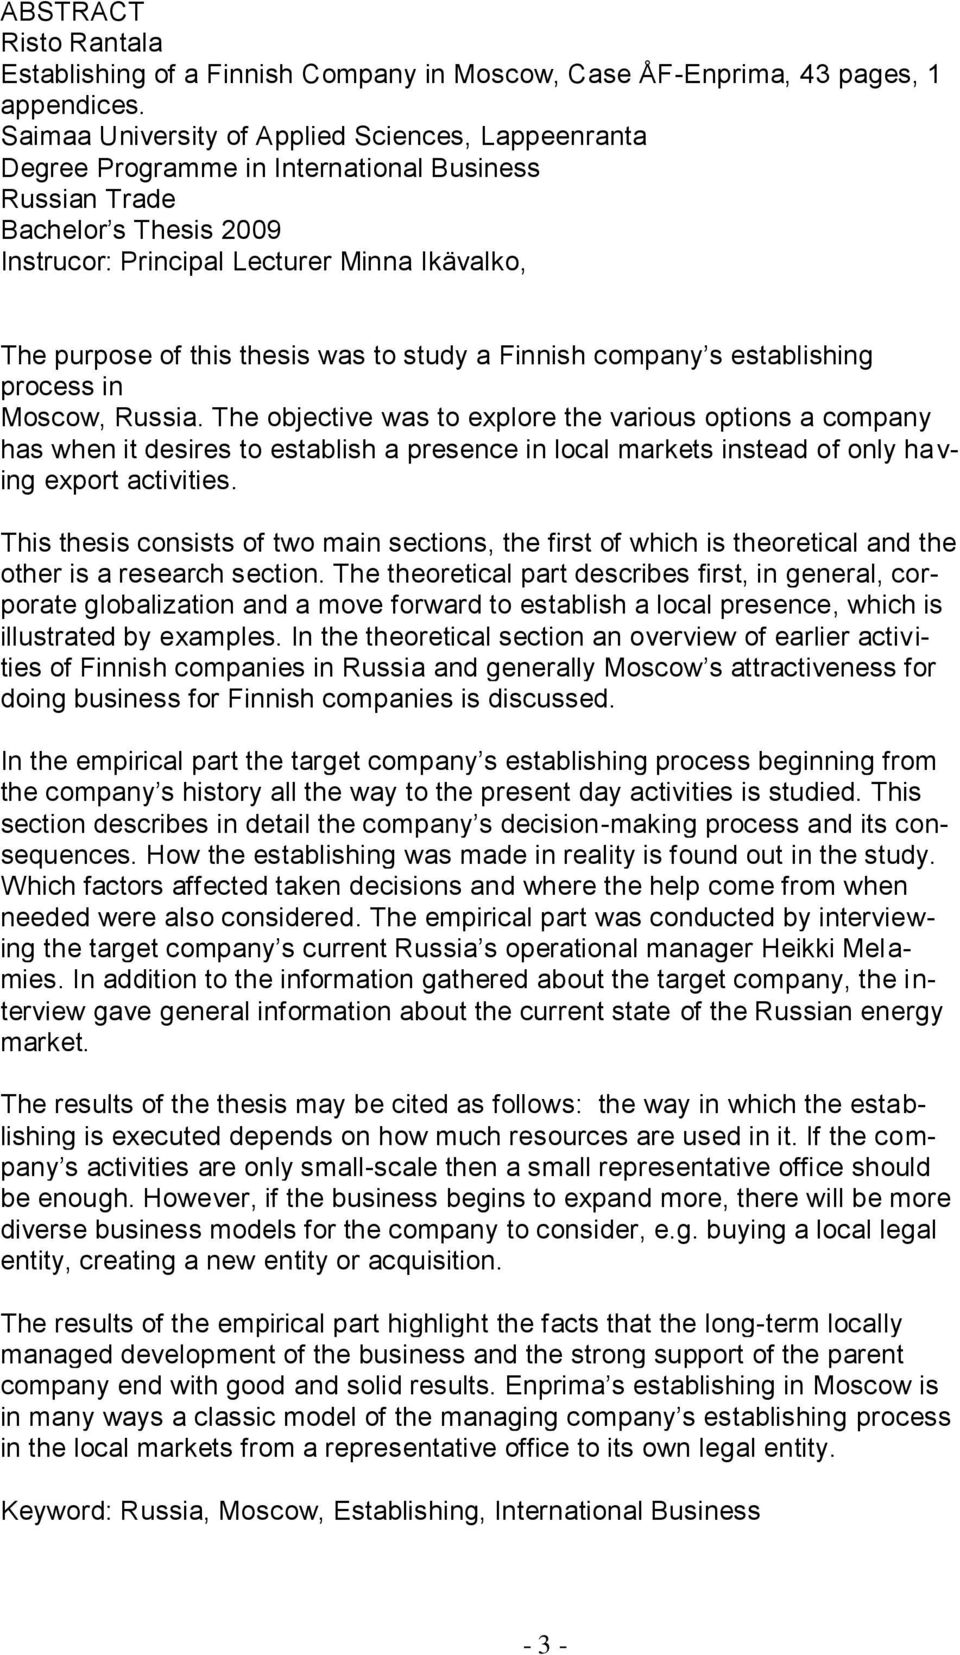 thesis was to study a Finnish company s establishing process in Moscow, Russia.